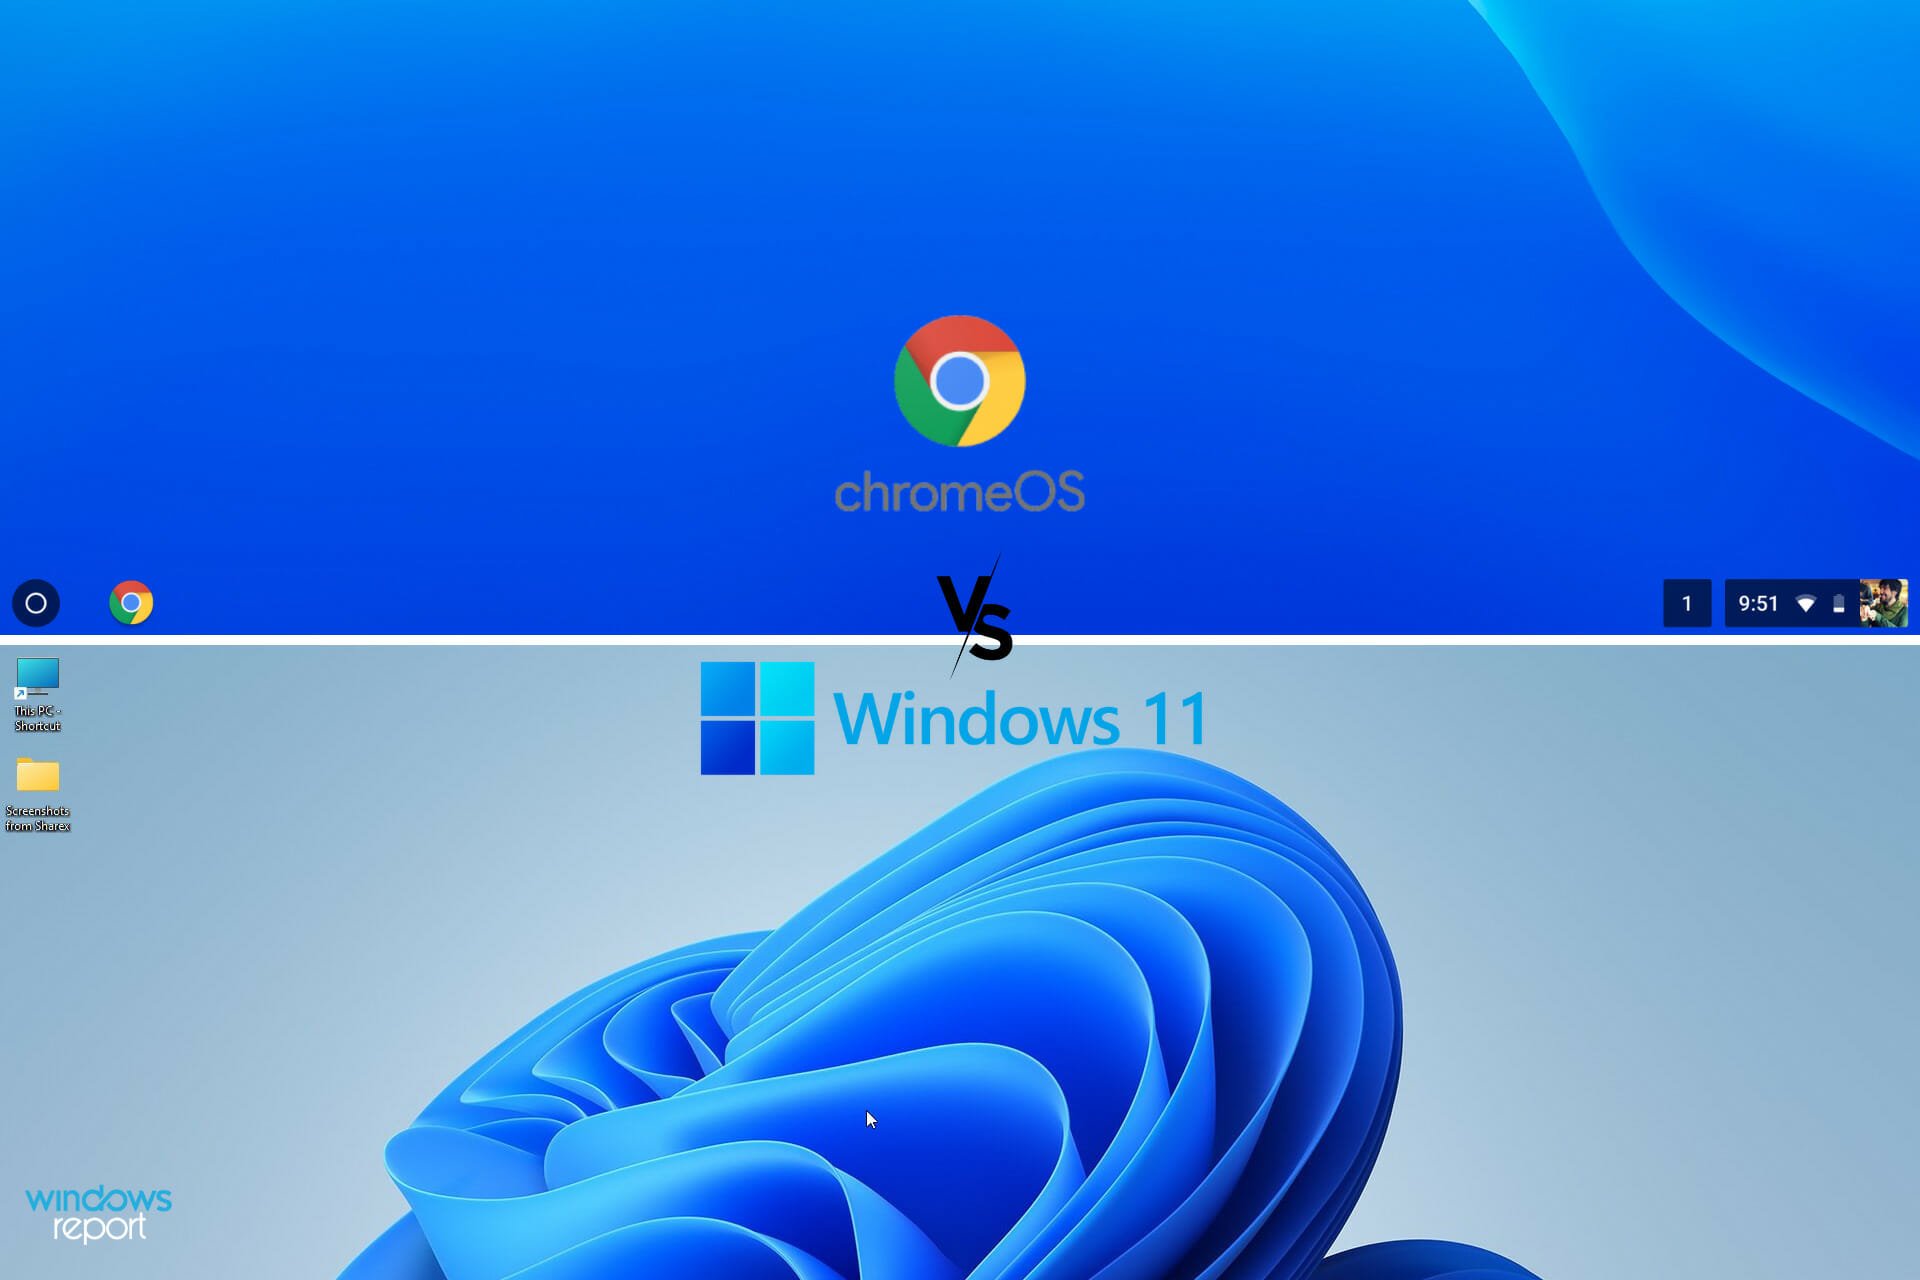 What's better Chrome OS or Windows 11?